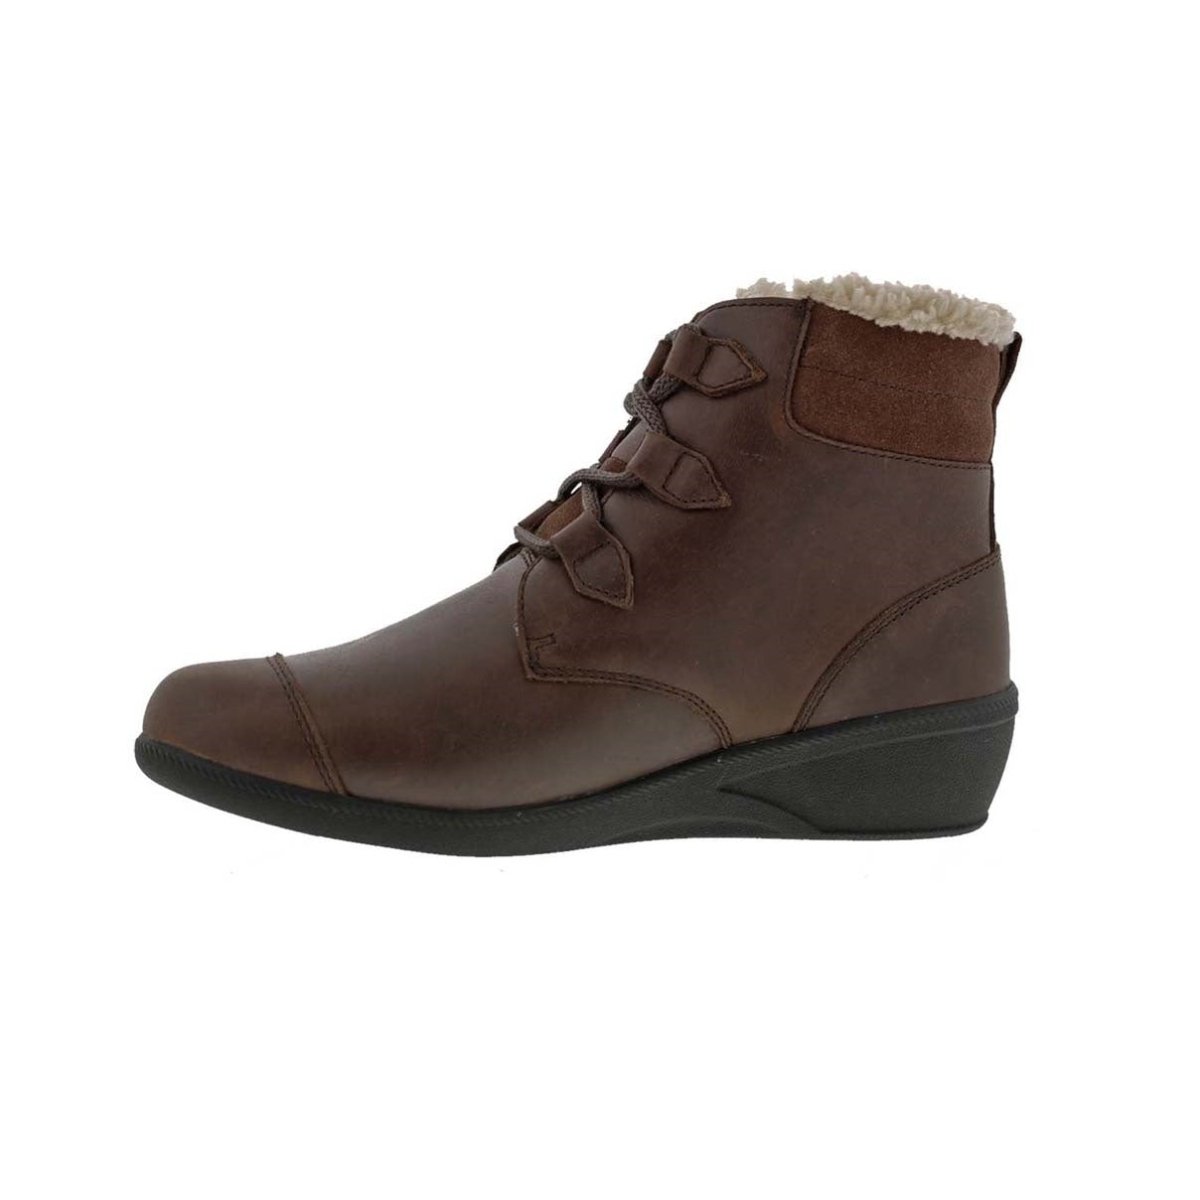 DREW JOSIE WOMEN BOOTS IN BROWN LEATHER - TLW Shoes